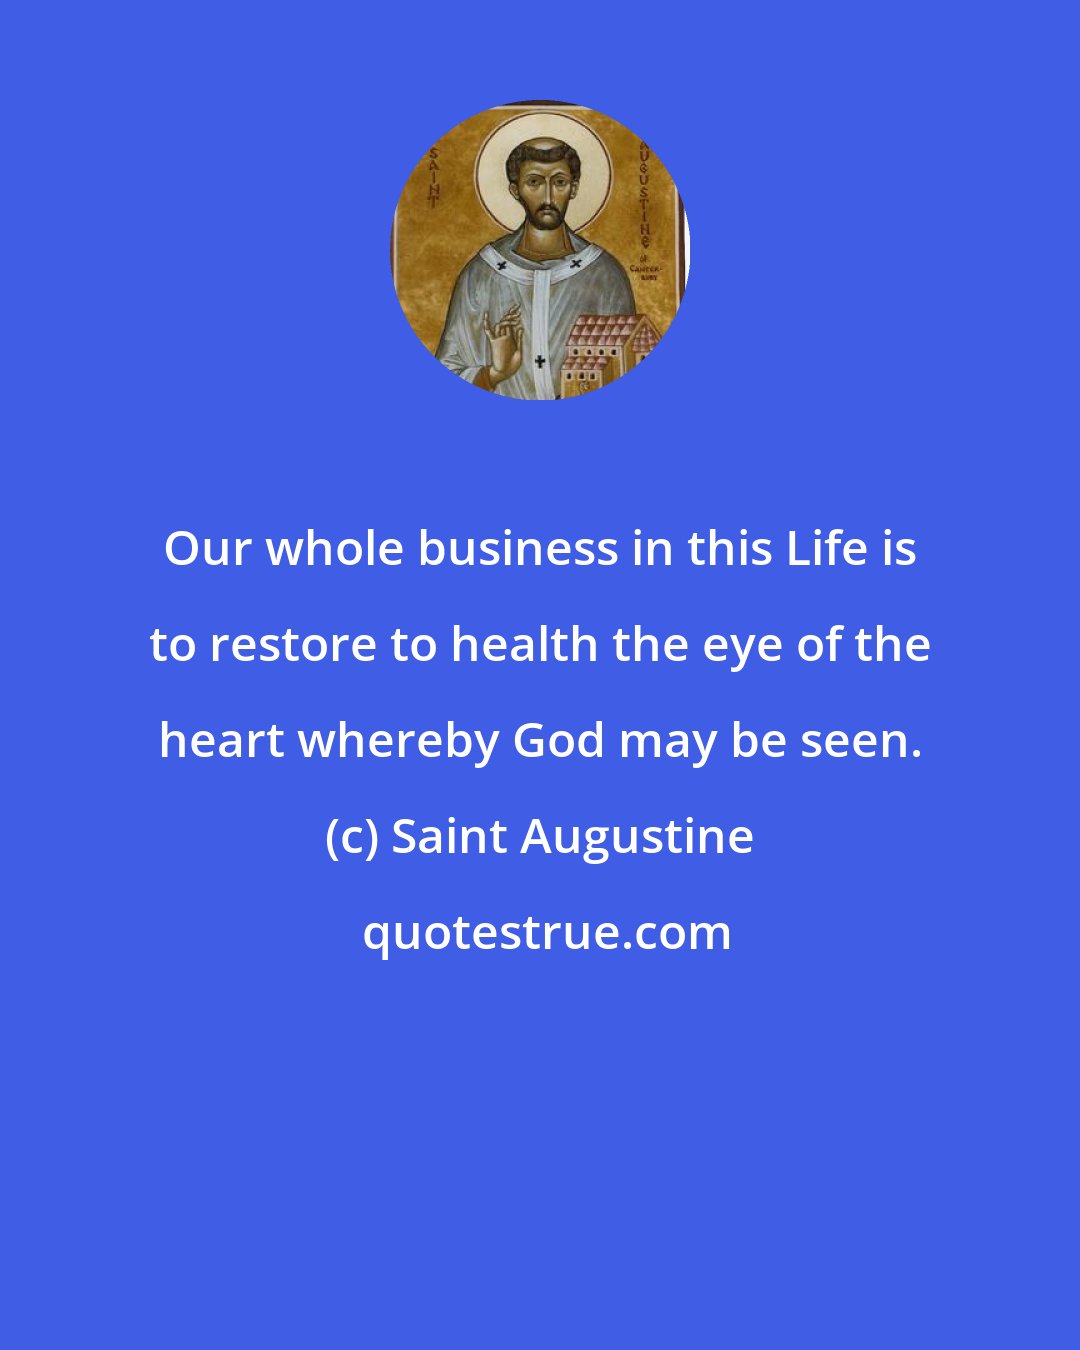 Saint Augustine: Our whole business in this Life is to restore to health the eye of the heart whereby God may be seen.